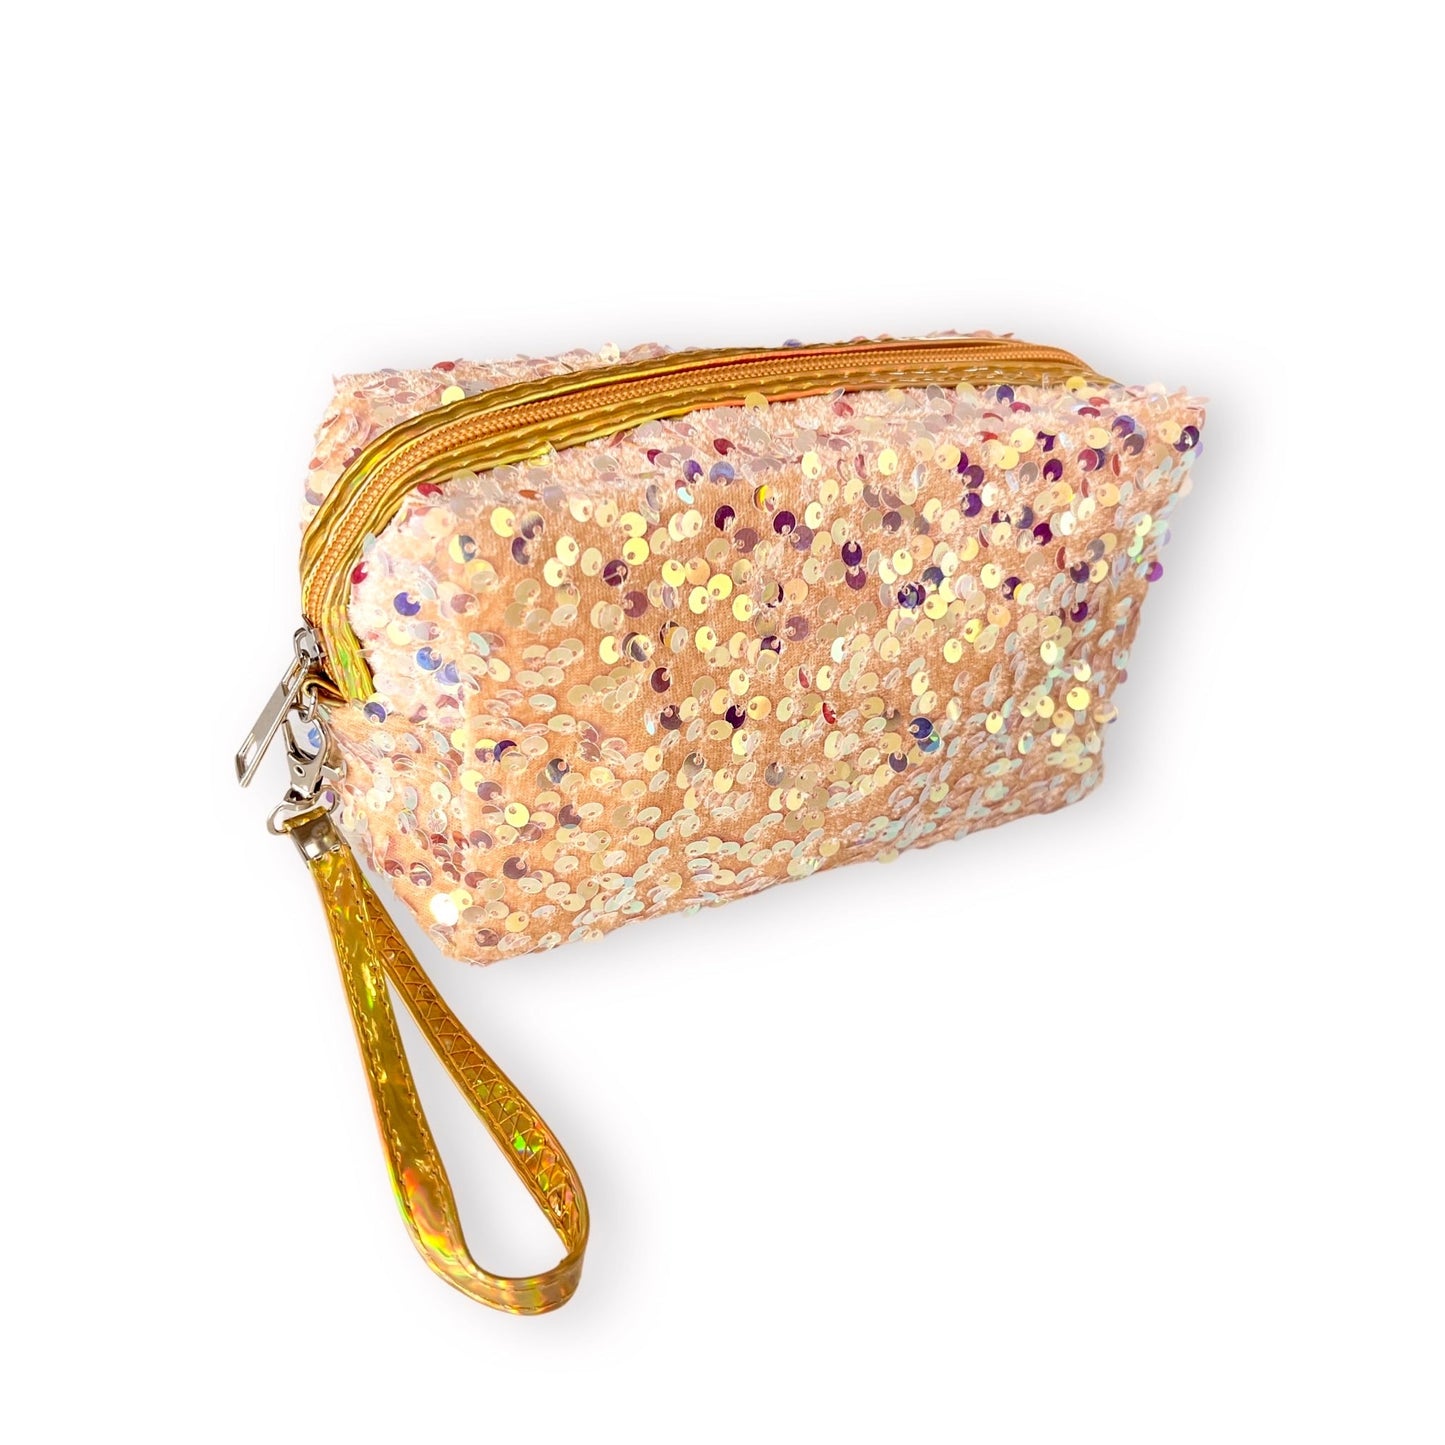 Bring on the Day Sequins Bag in Gold